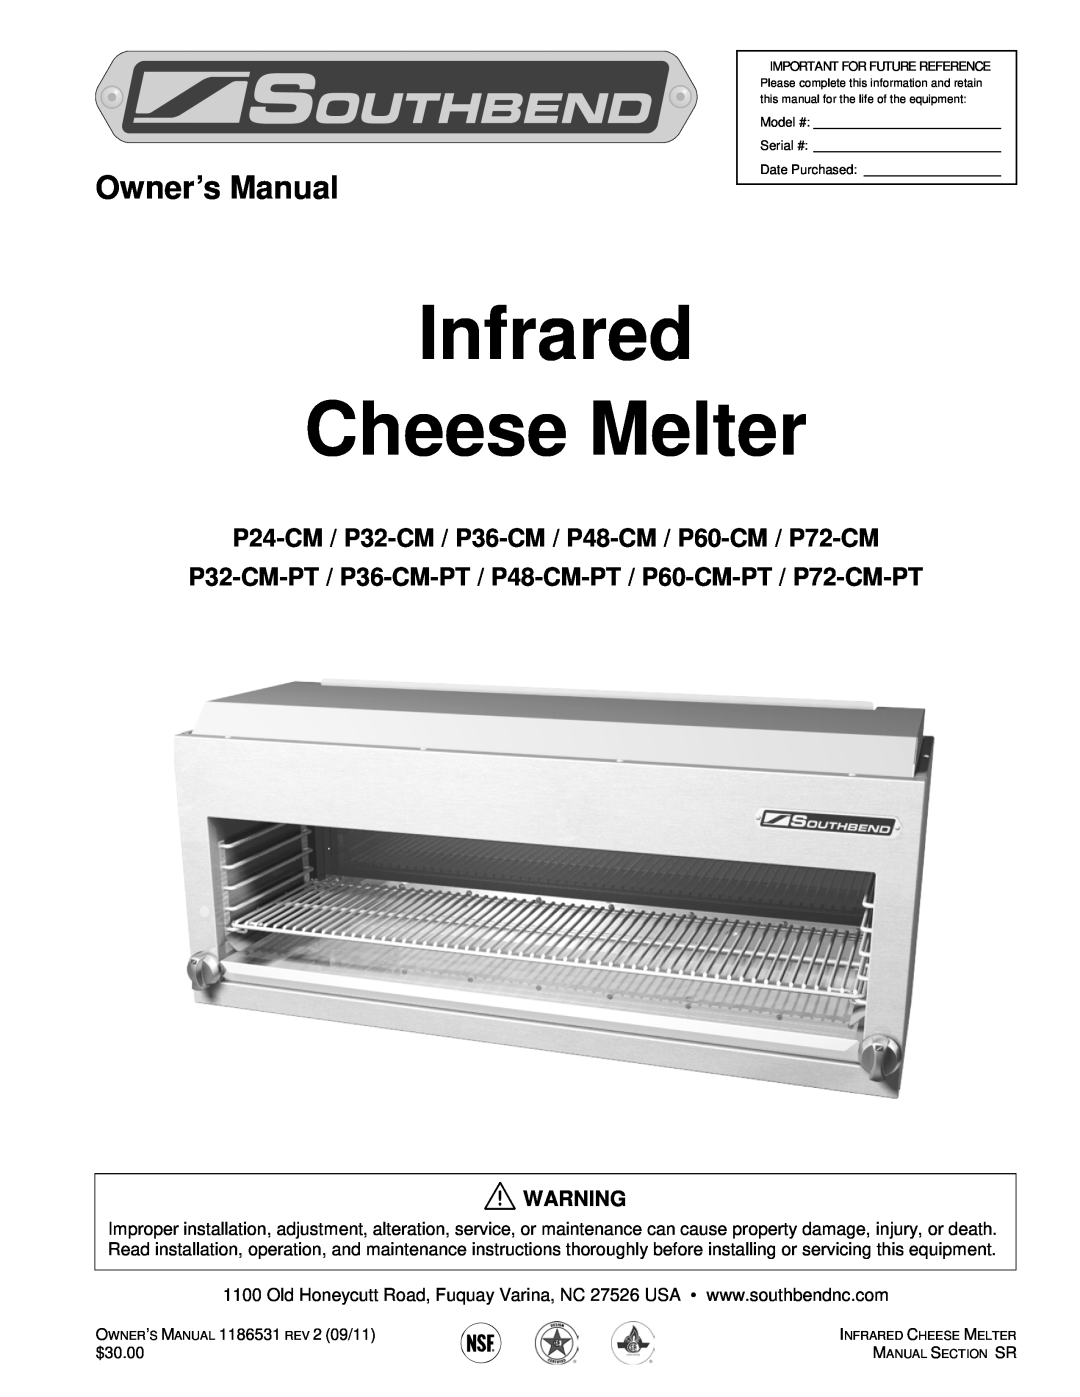 Southbend manual Infrared Cheese Melter, Owner’s Manual, P24-CM / P32-CM / P36-CM / P48-CM / P60-CM / P72-CM 